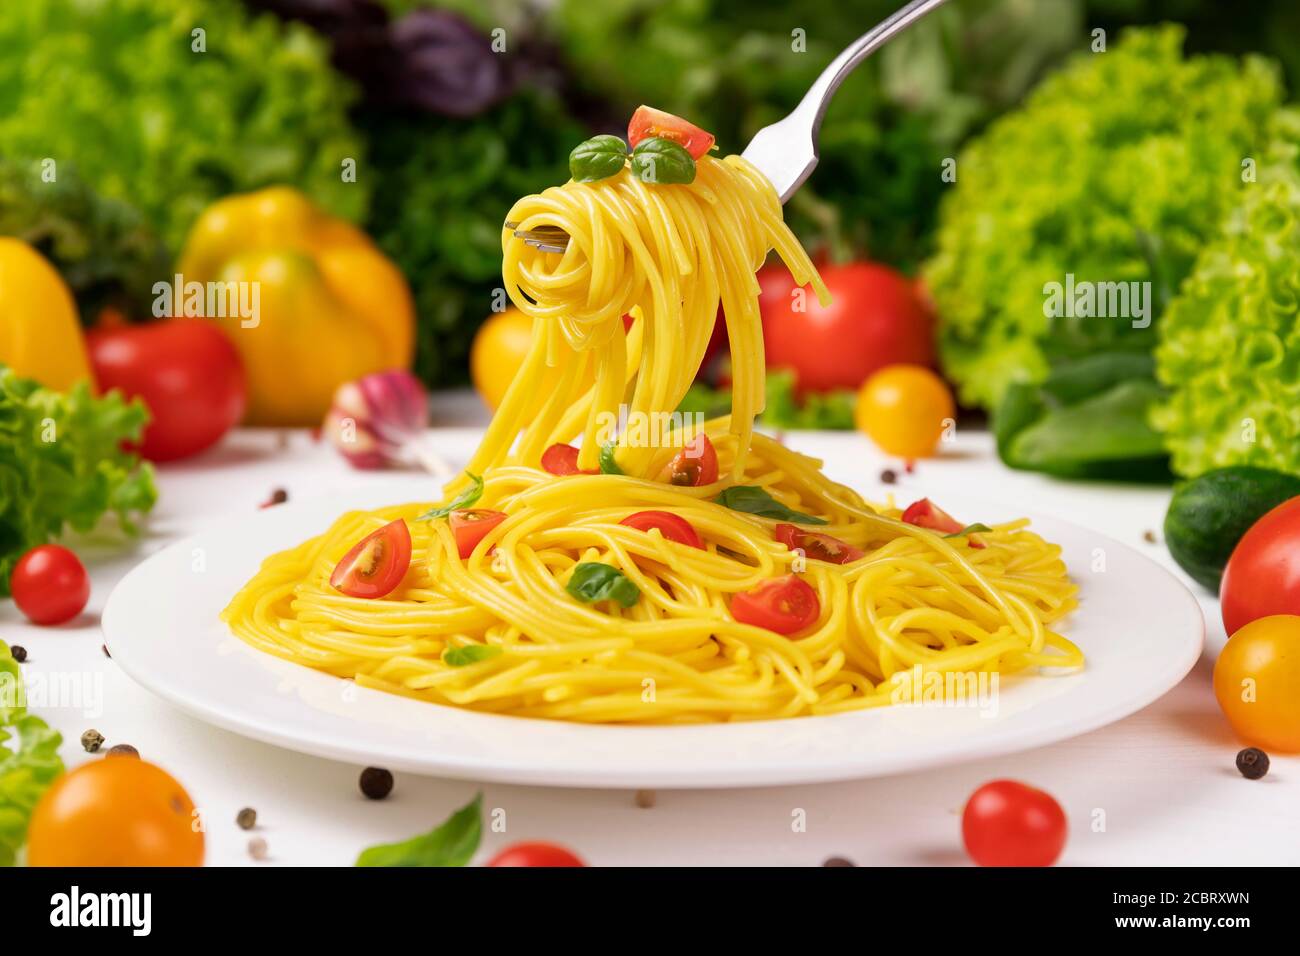 Plate of italian pasta, spaghetti on fork with tomatoes and basil Stock Photo